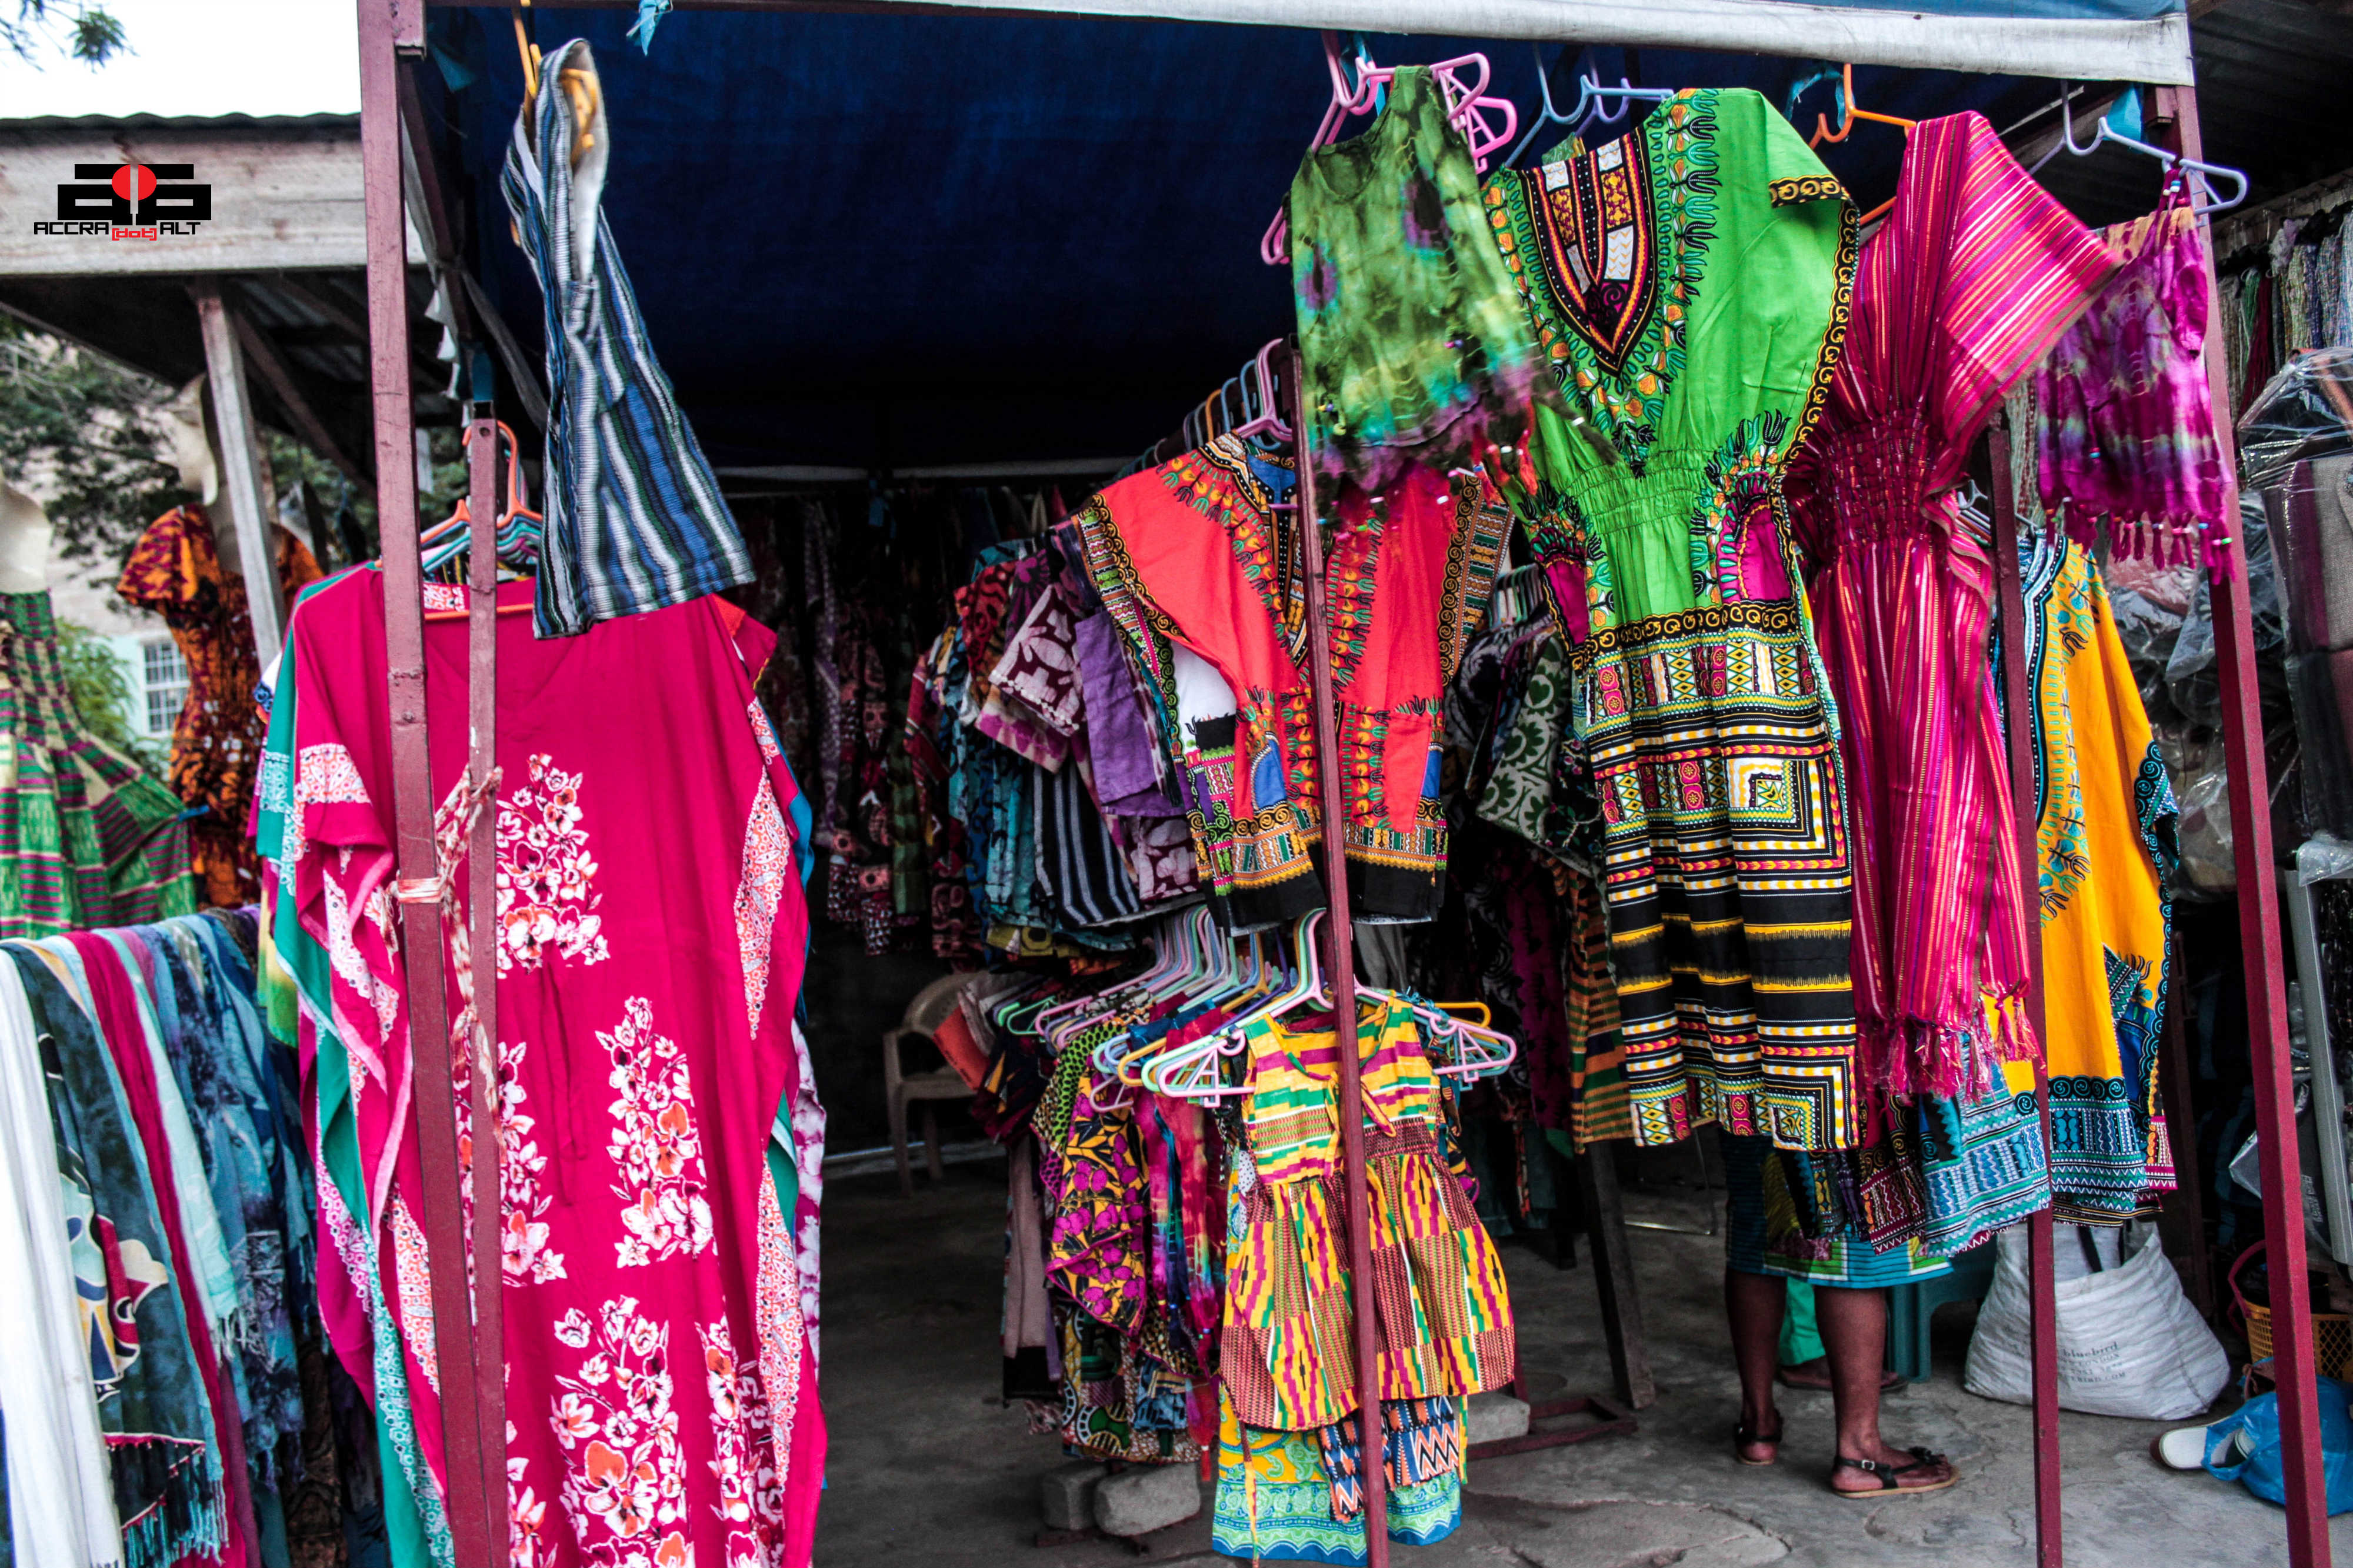 Fashion stalls like this are making a decent income for  the owners.